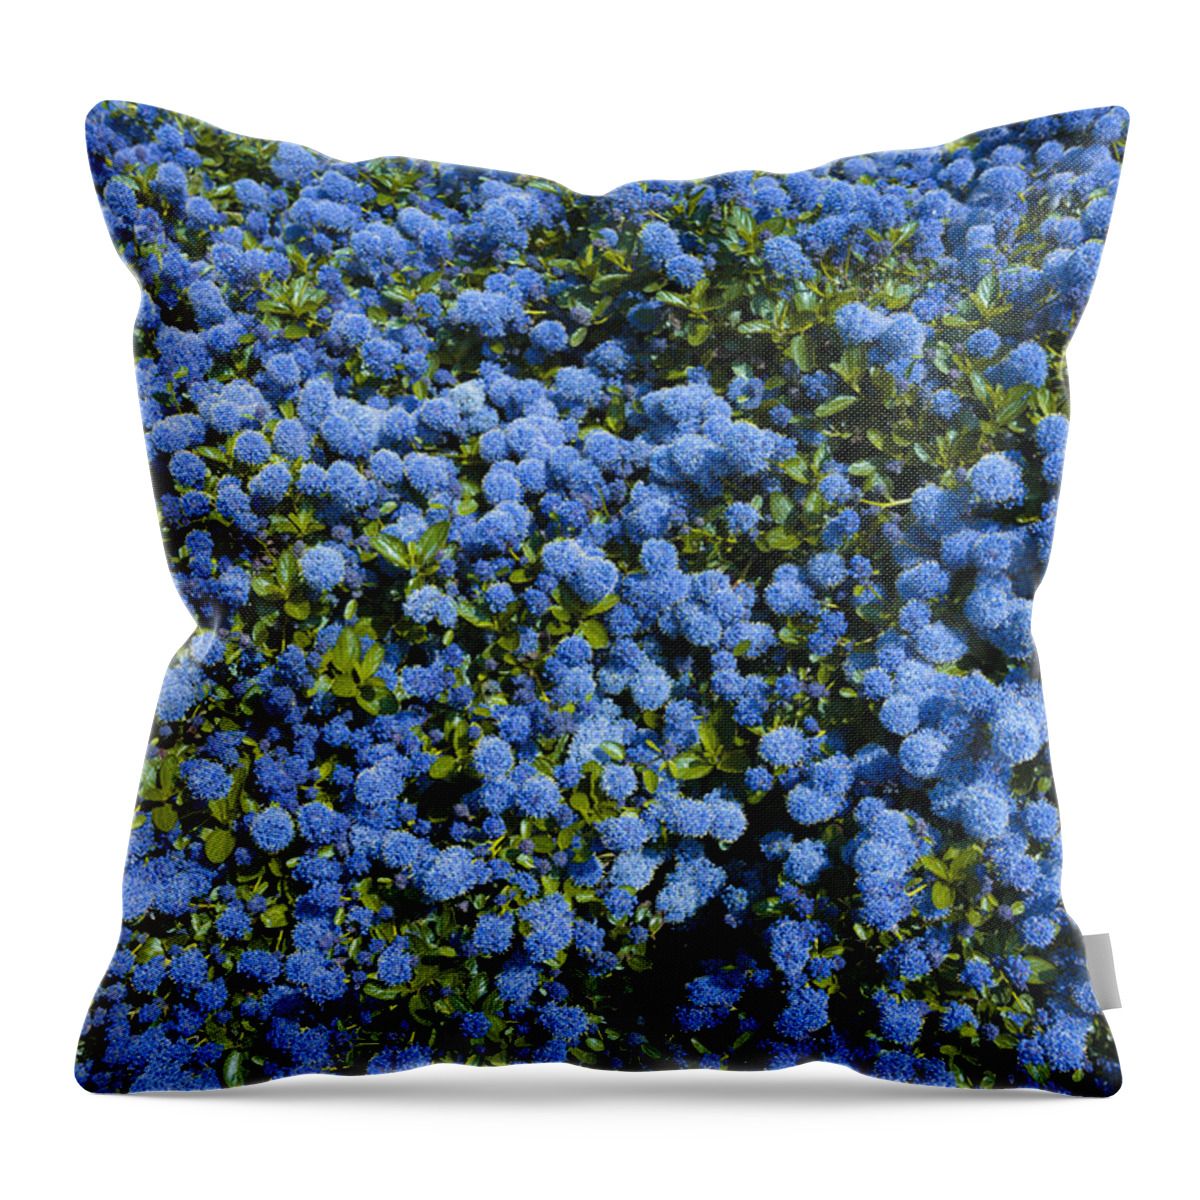 Anniversary Throw Pillow featuring the photograph All Blue by Svetlana Sewell